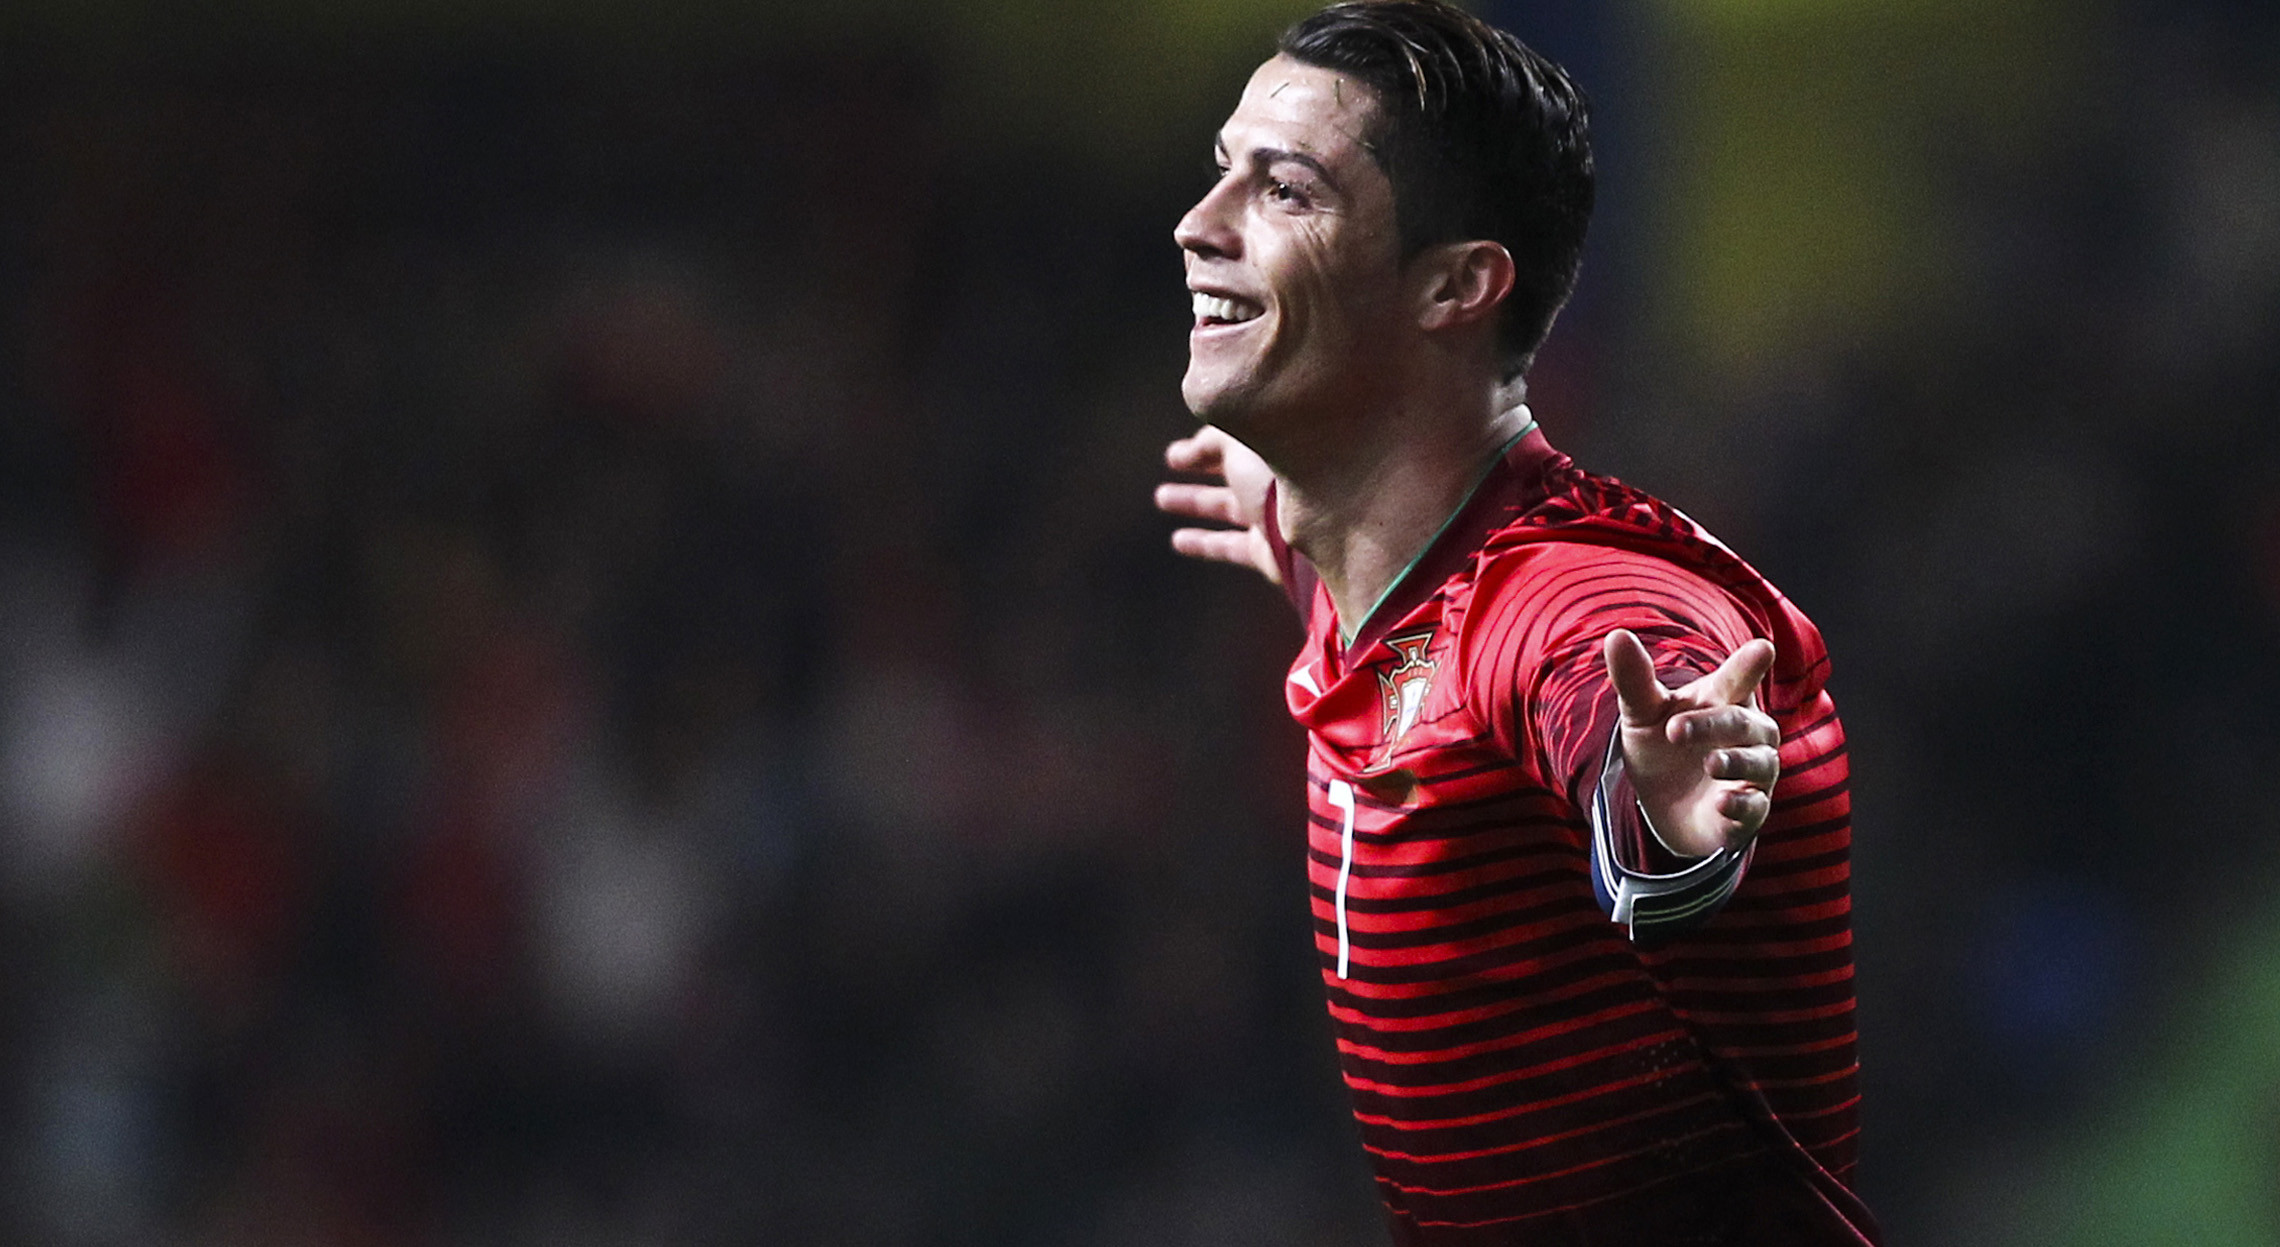 ronaldo wallpaper download,red,football player,player,photography,championship